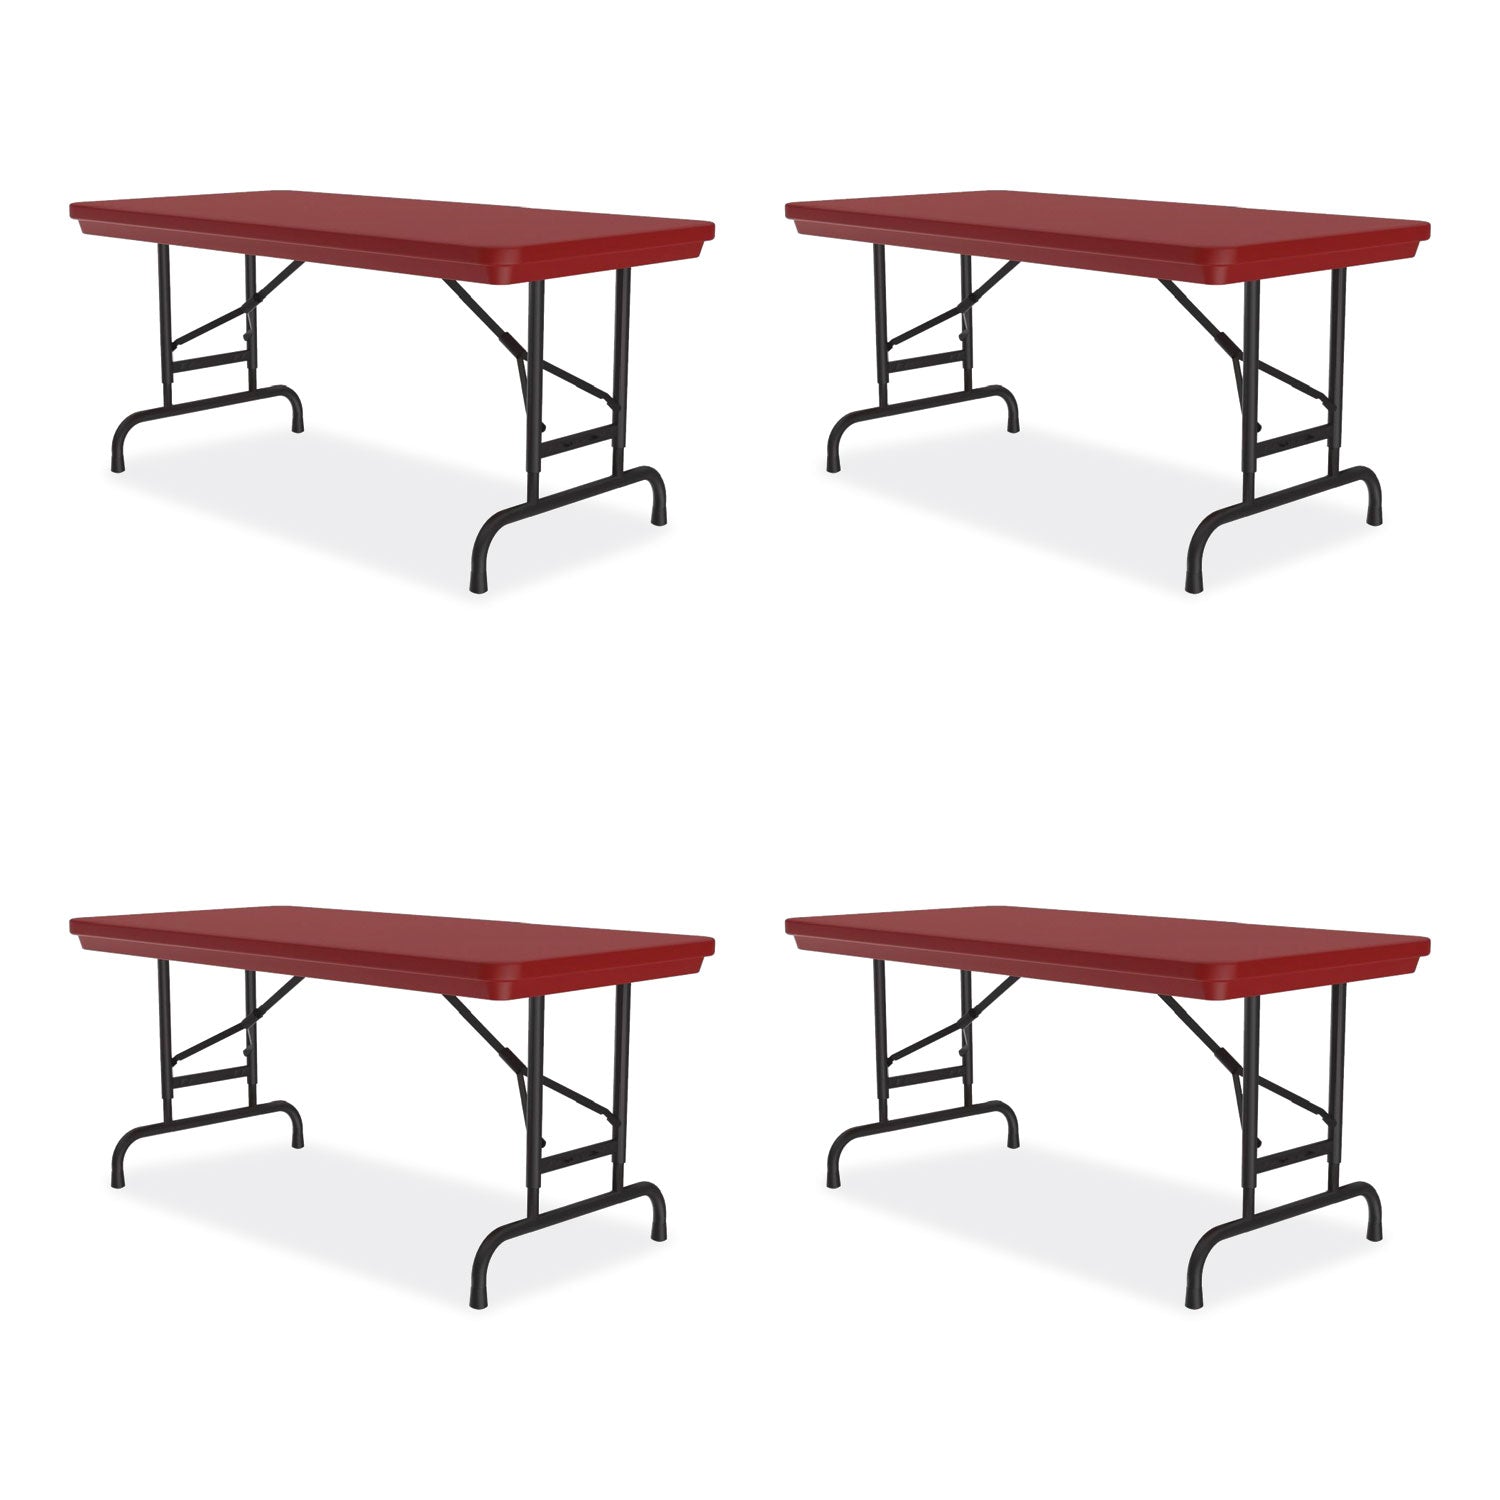 adjustable-folding-table-rectangular-48-x-24-x-22-to-32-red-top-black-legs-4-pallet-ships-in-4-6-business-days_crlra2448254p - 1